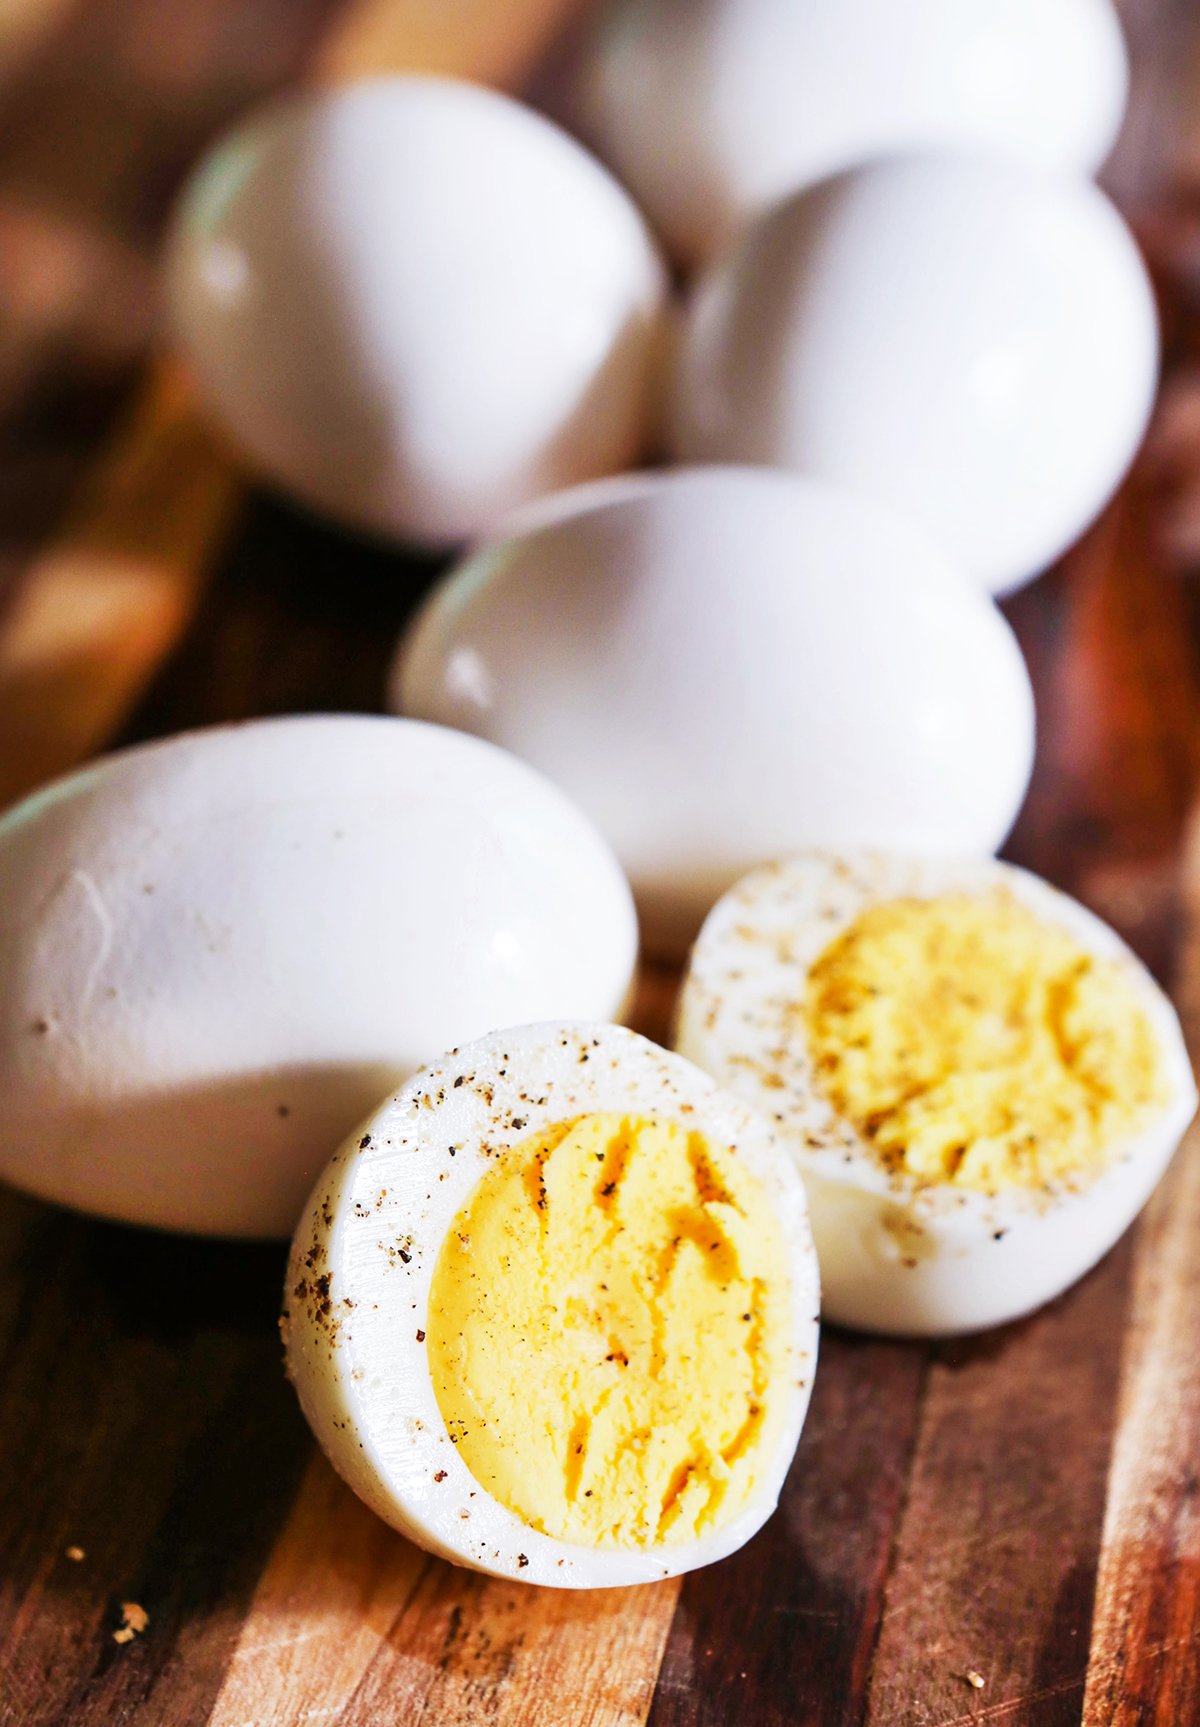 Hard boiled eggs with one peeled and cut in half, sprinkled with pepper. 